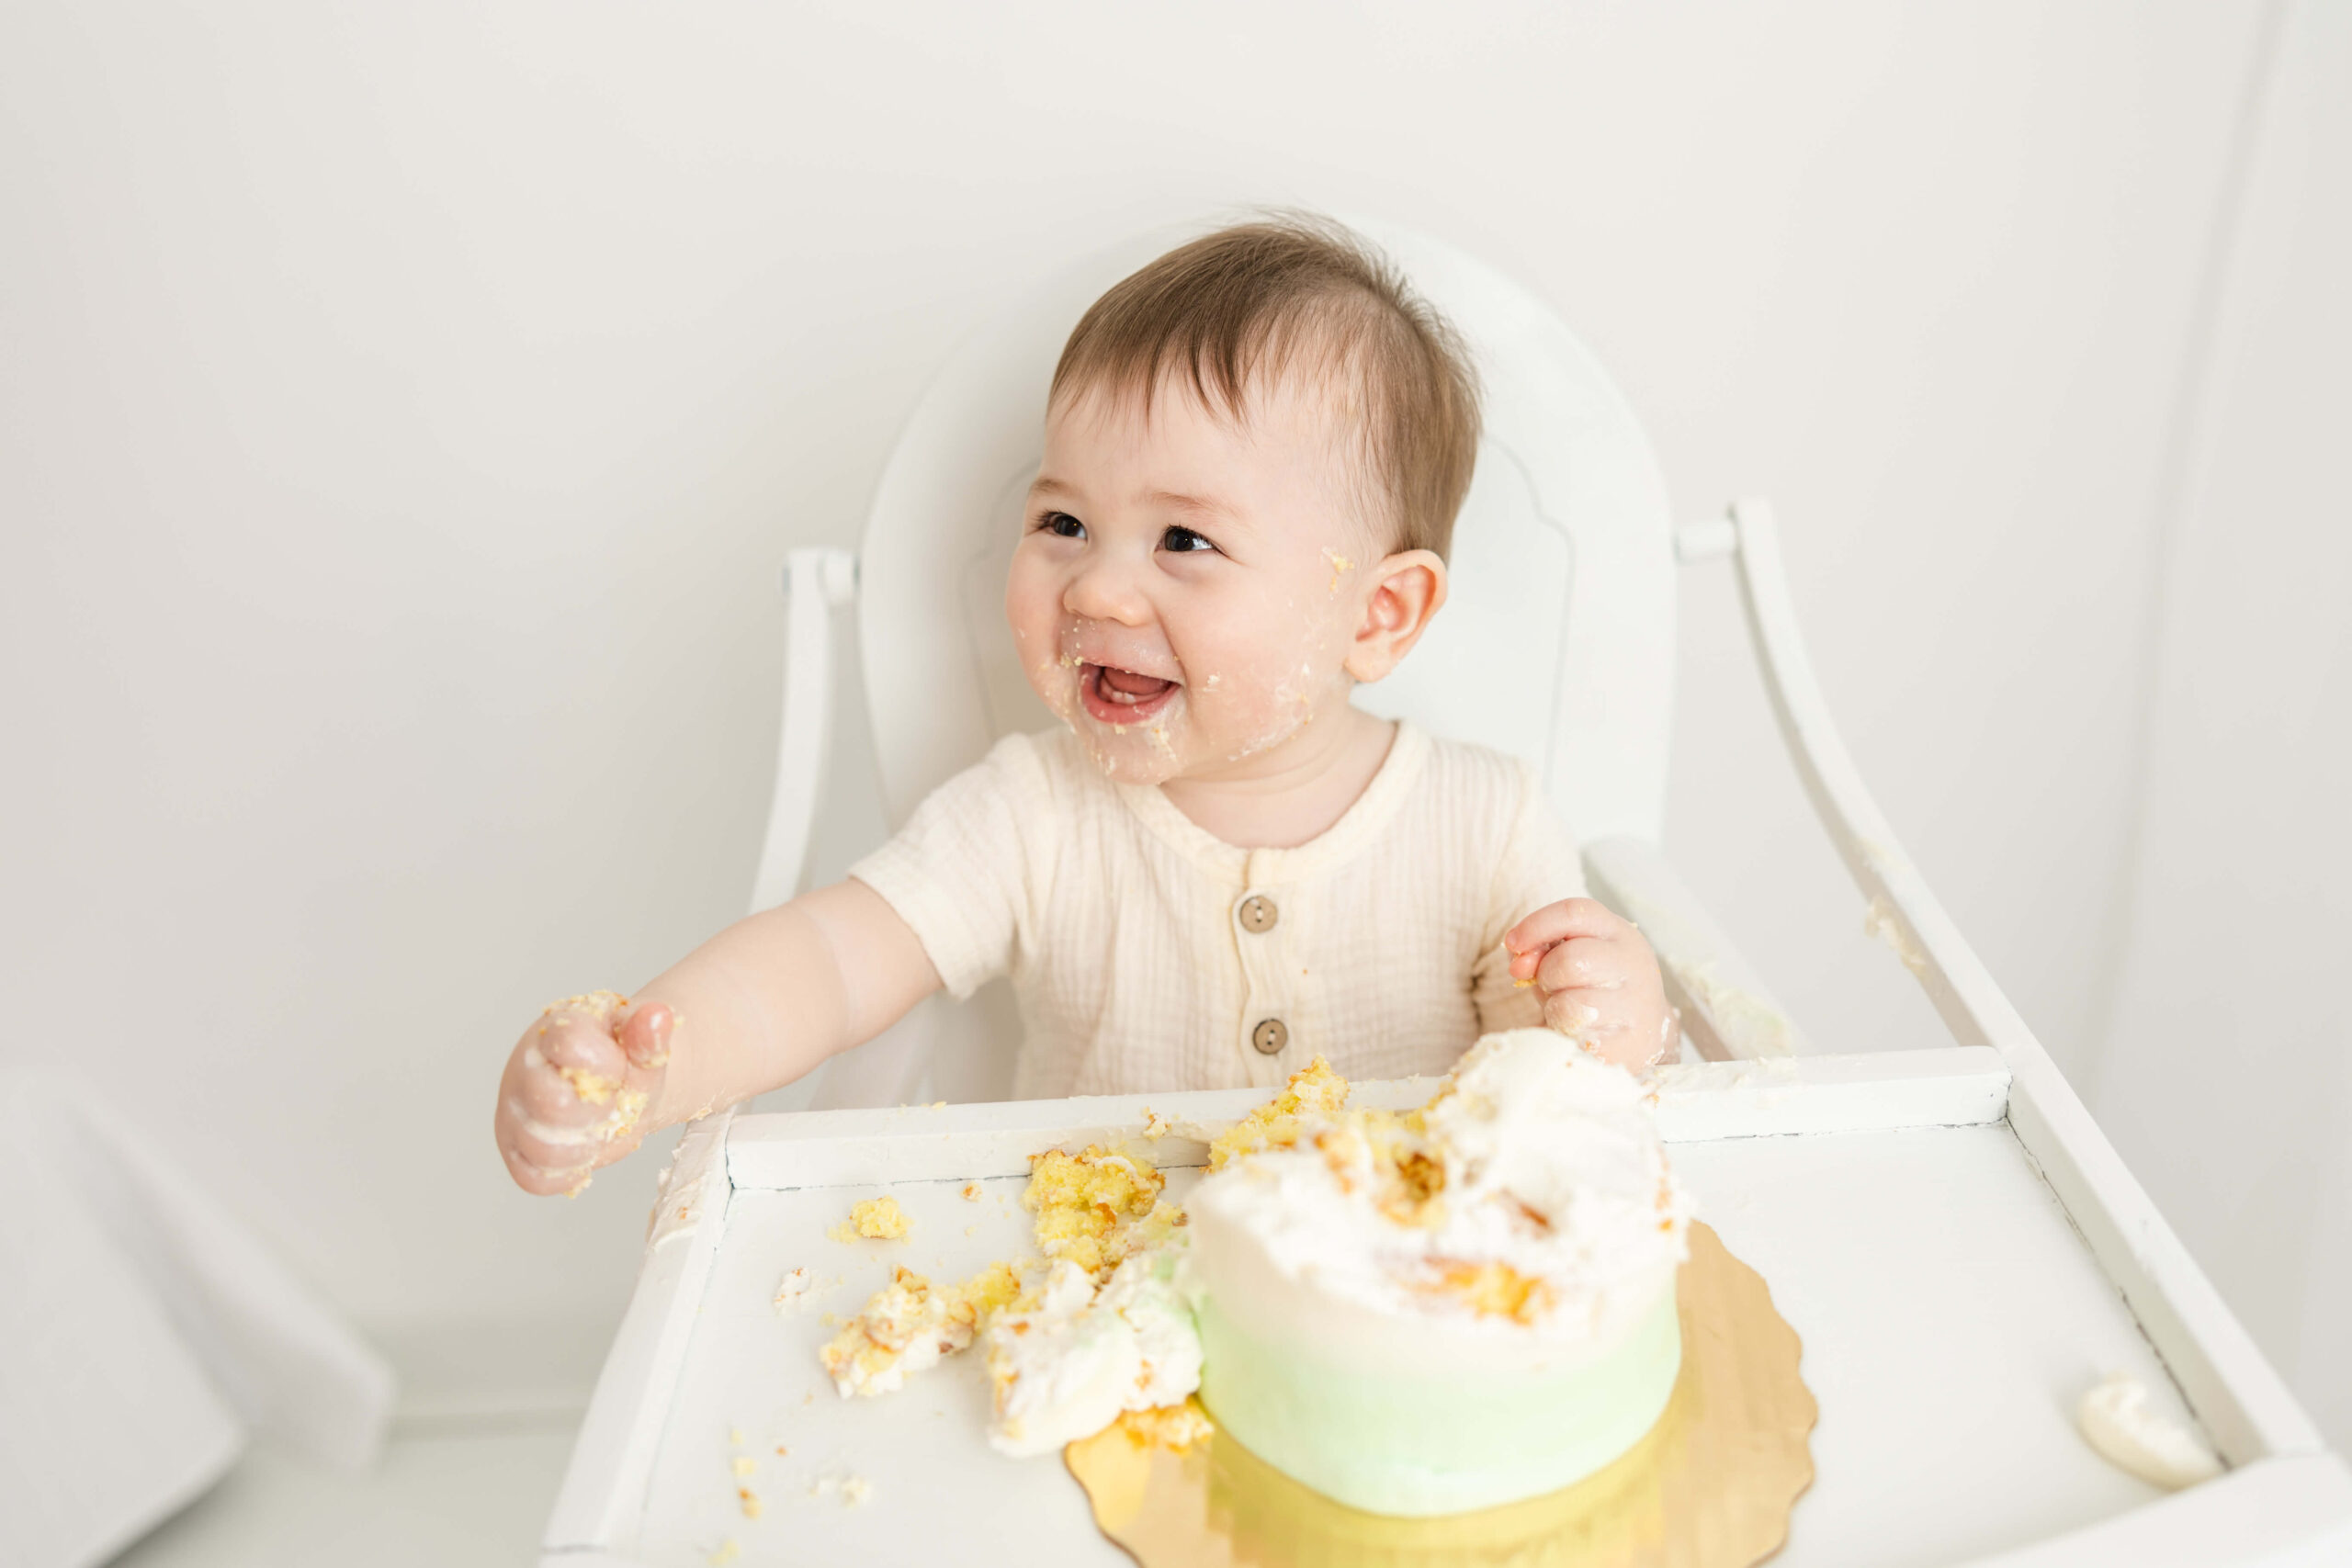 Smiles were captured from this little man while enjoying his cake during his cake smash session.